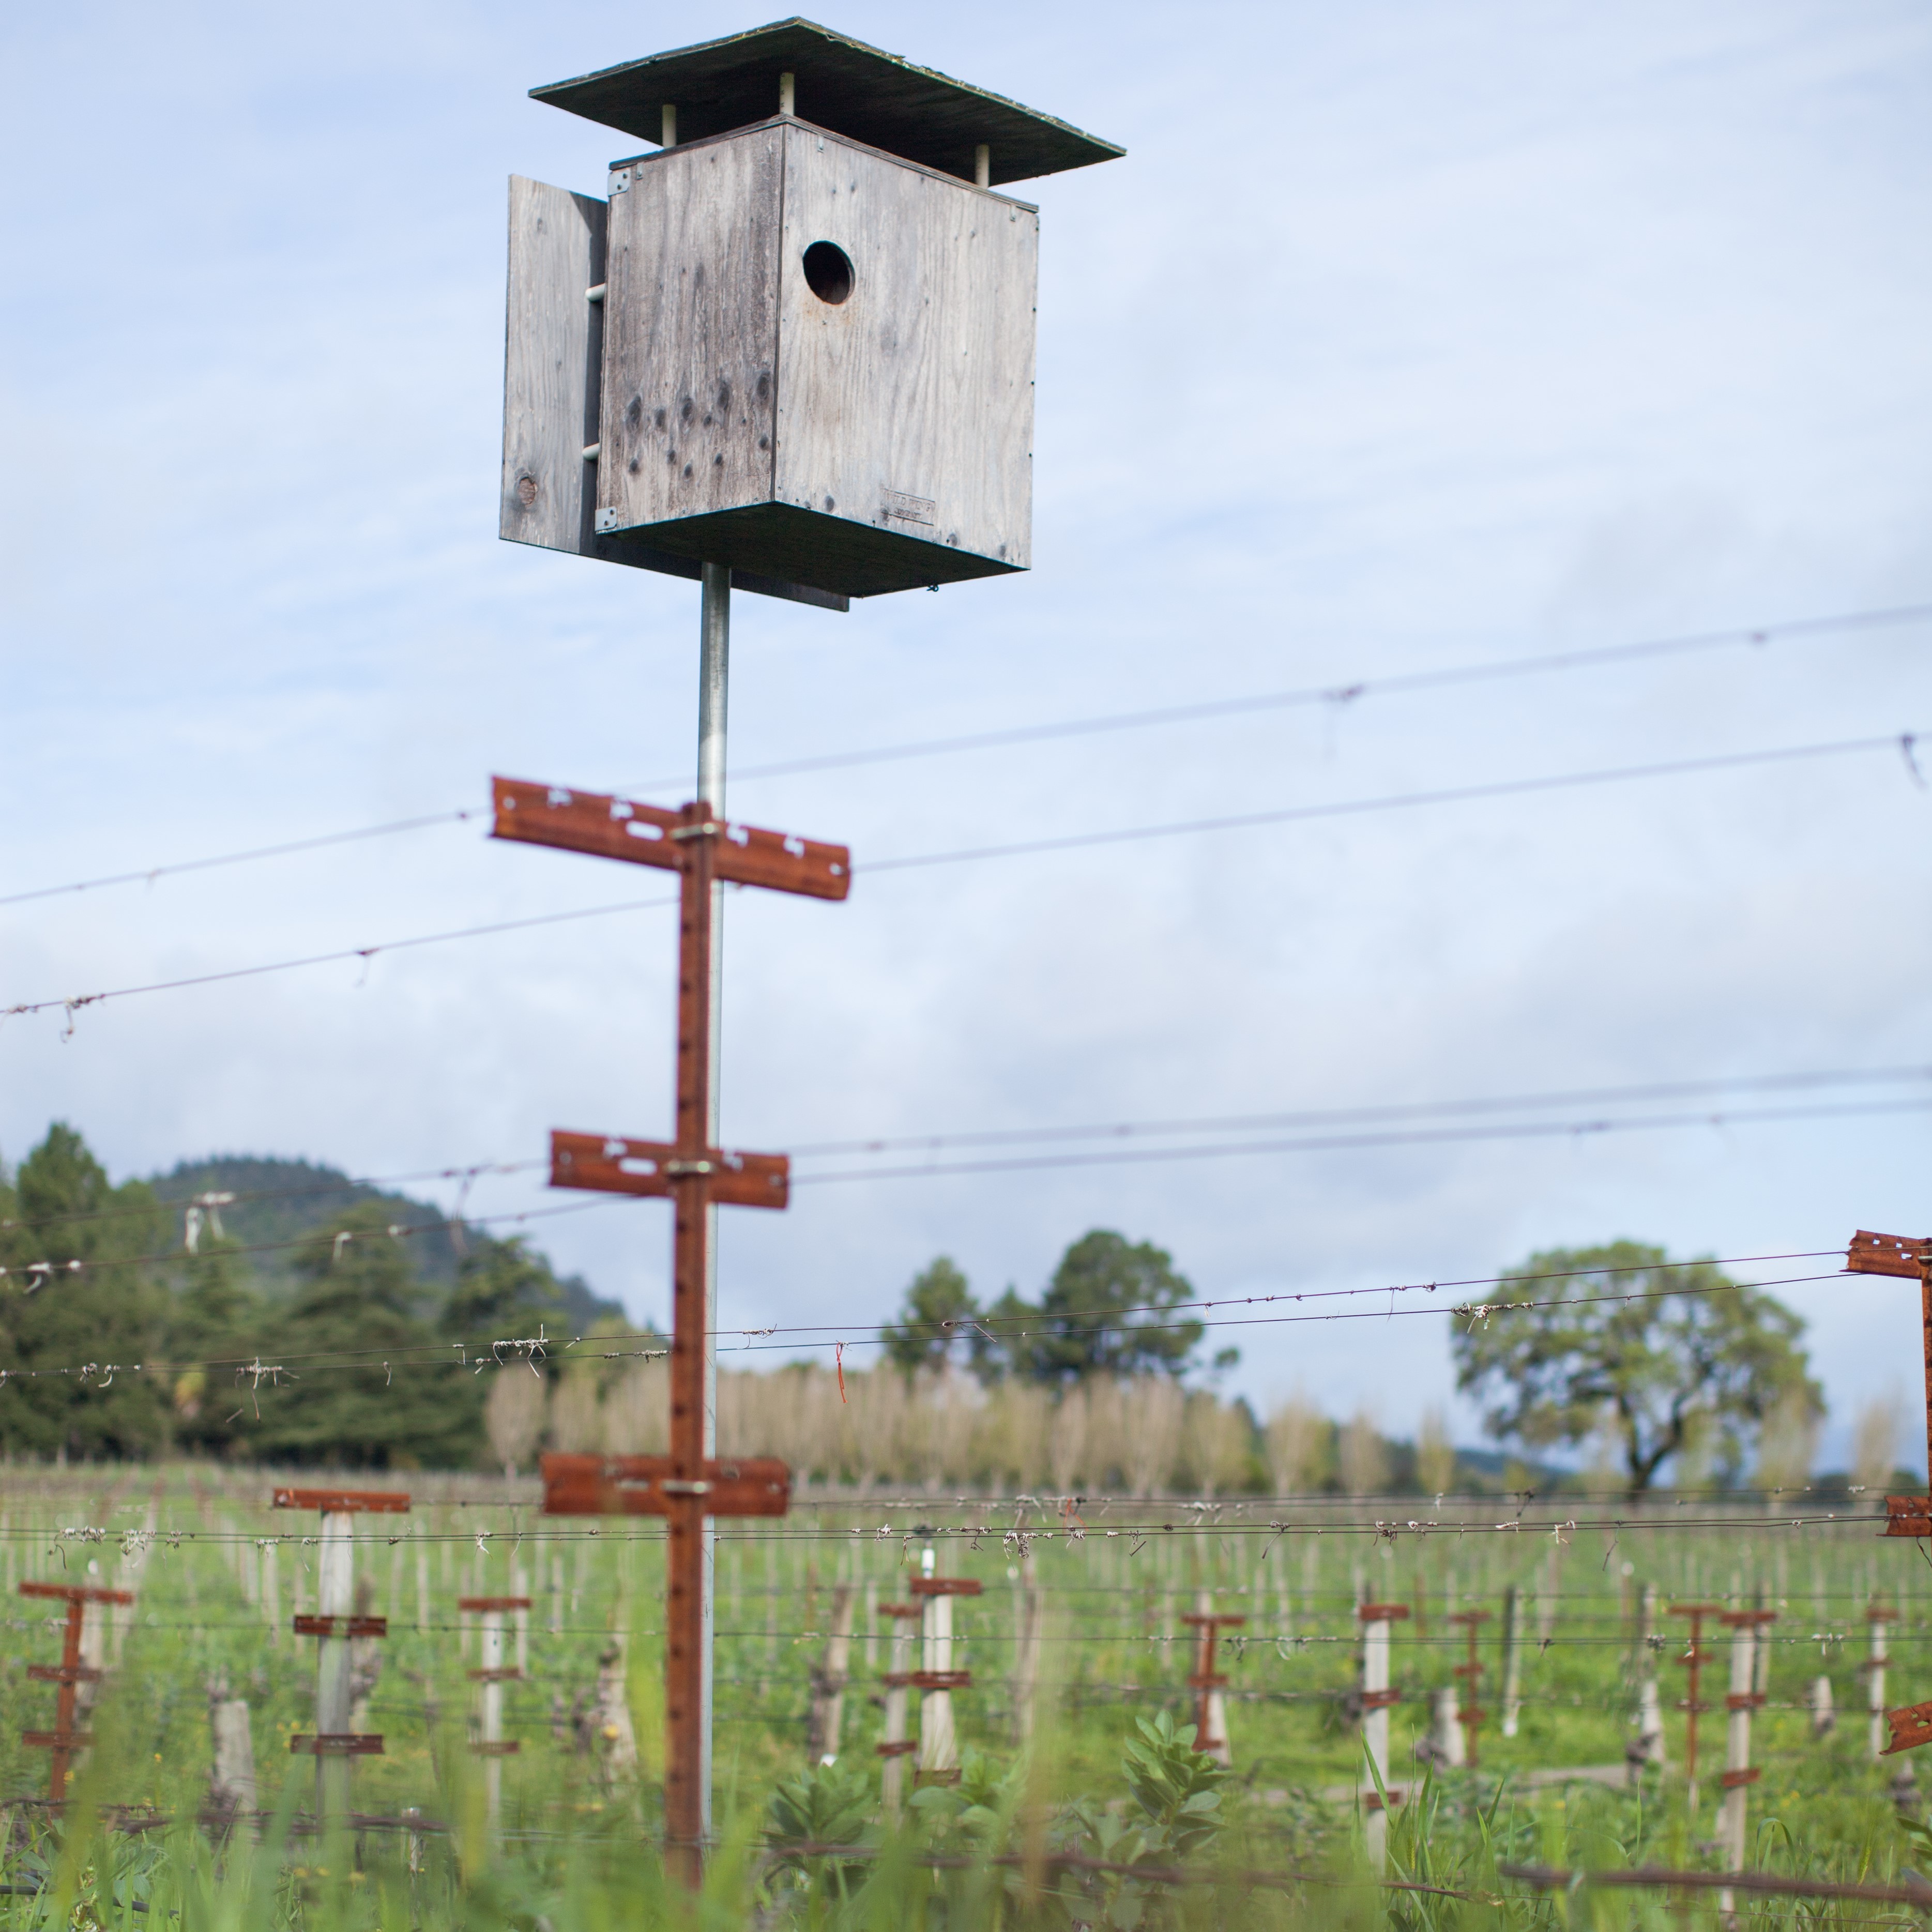 Owl and raptor boxes at Far Niente square